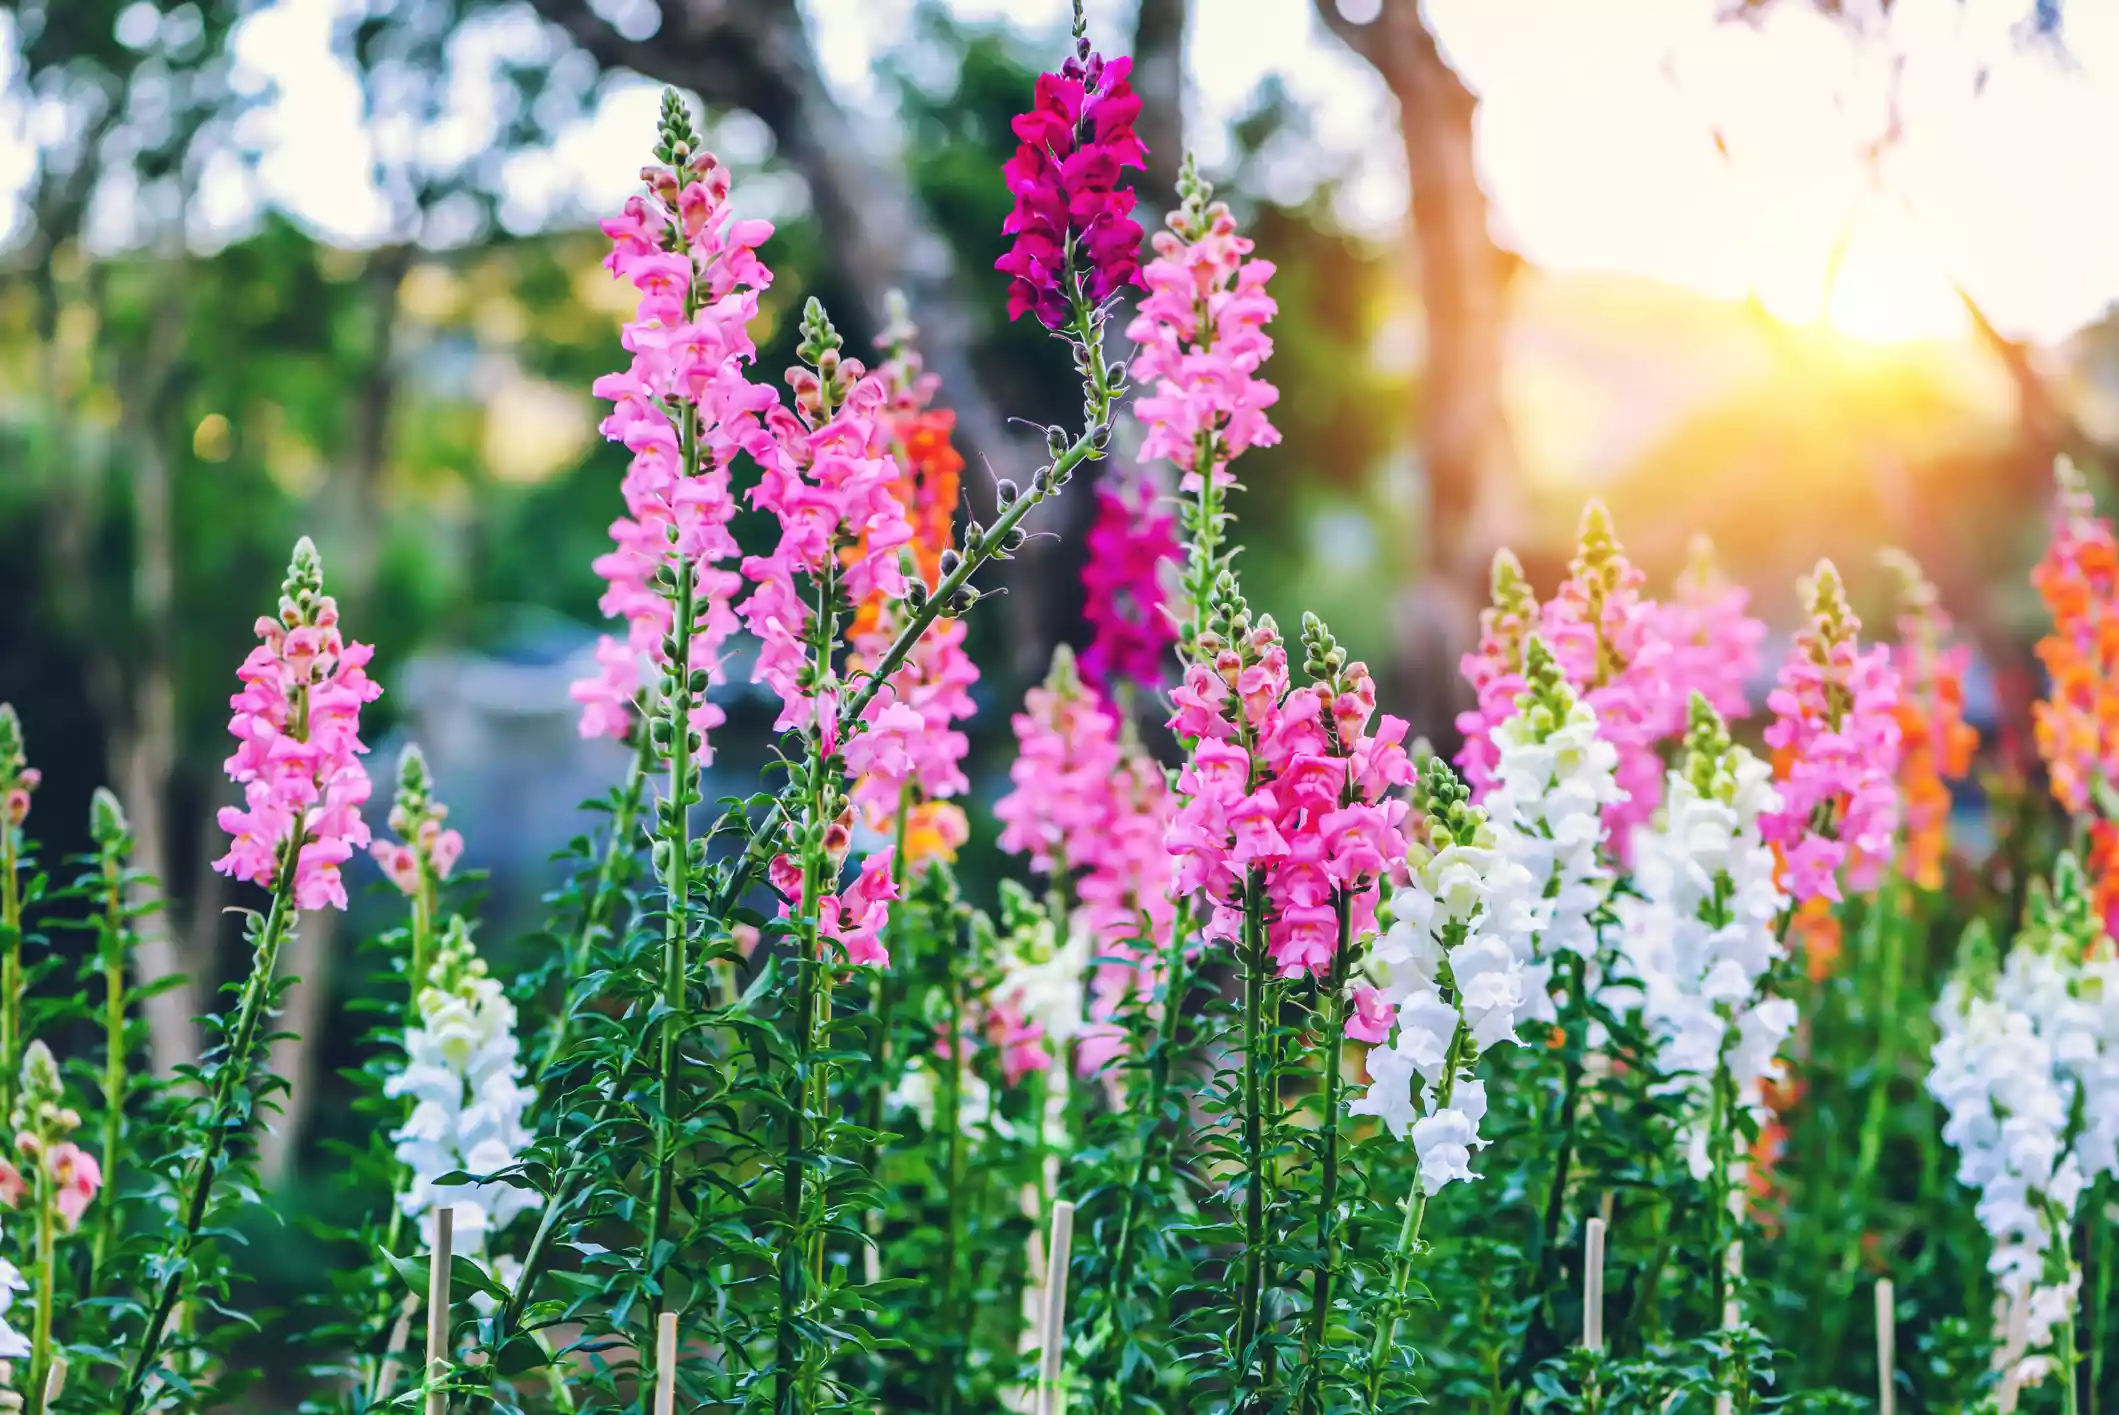 Field of colorful snapdragons